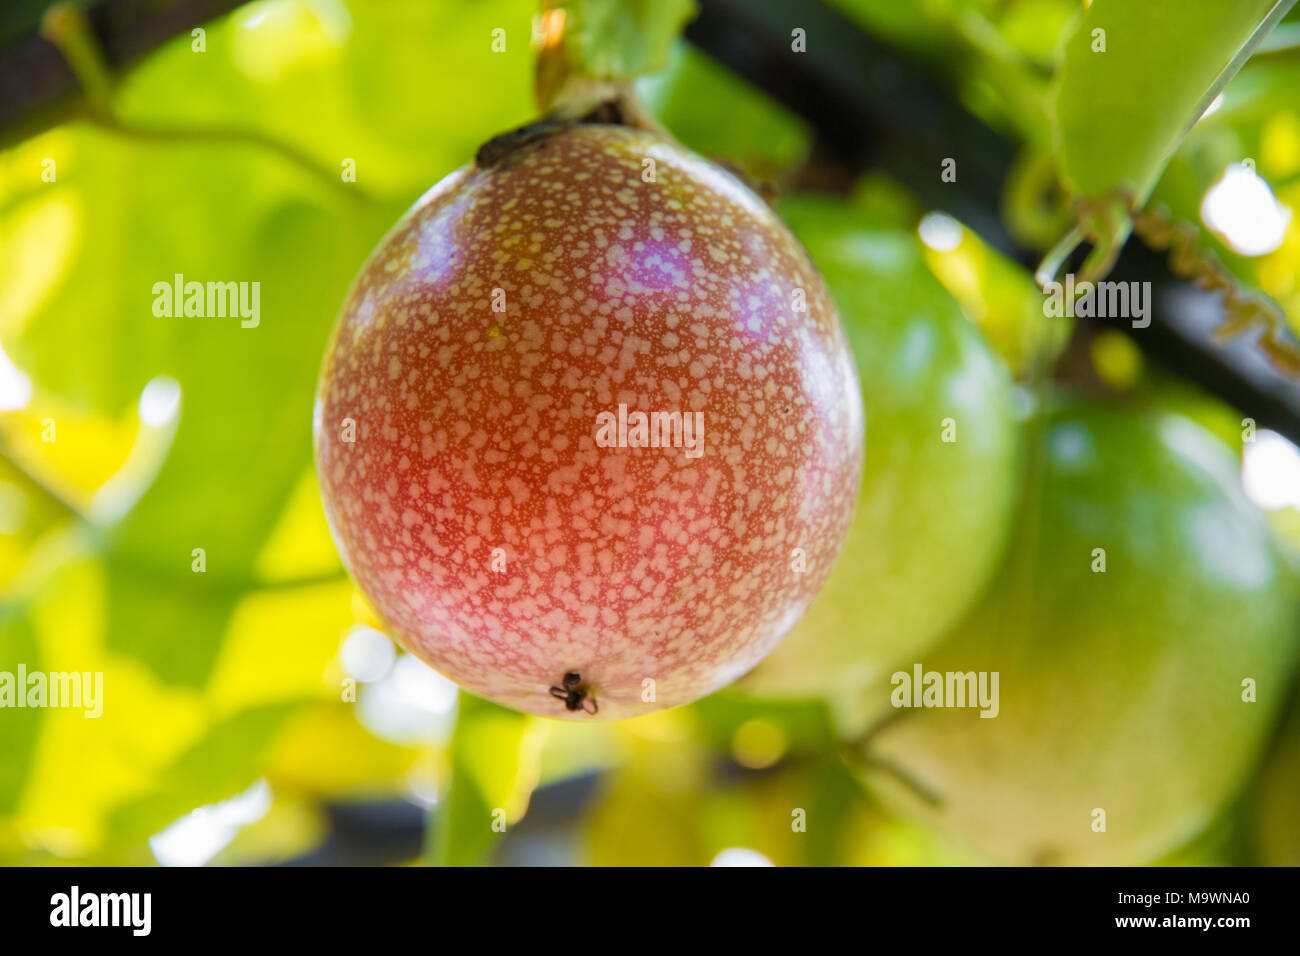 A close-up of a beautiful red passion fruit (Passiflora edulis). Stock Photo